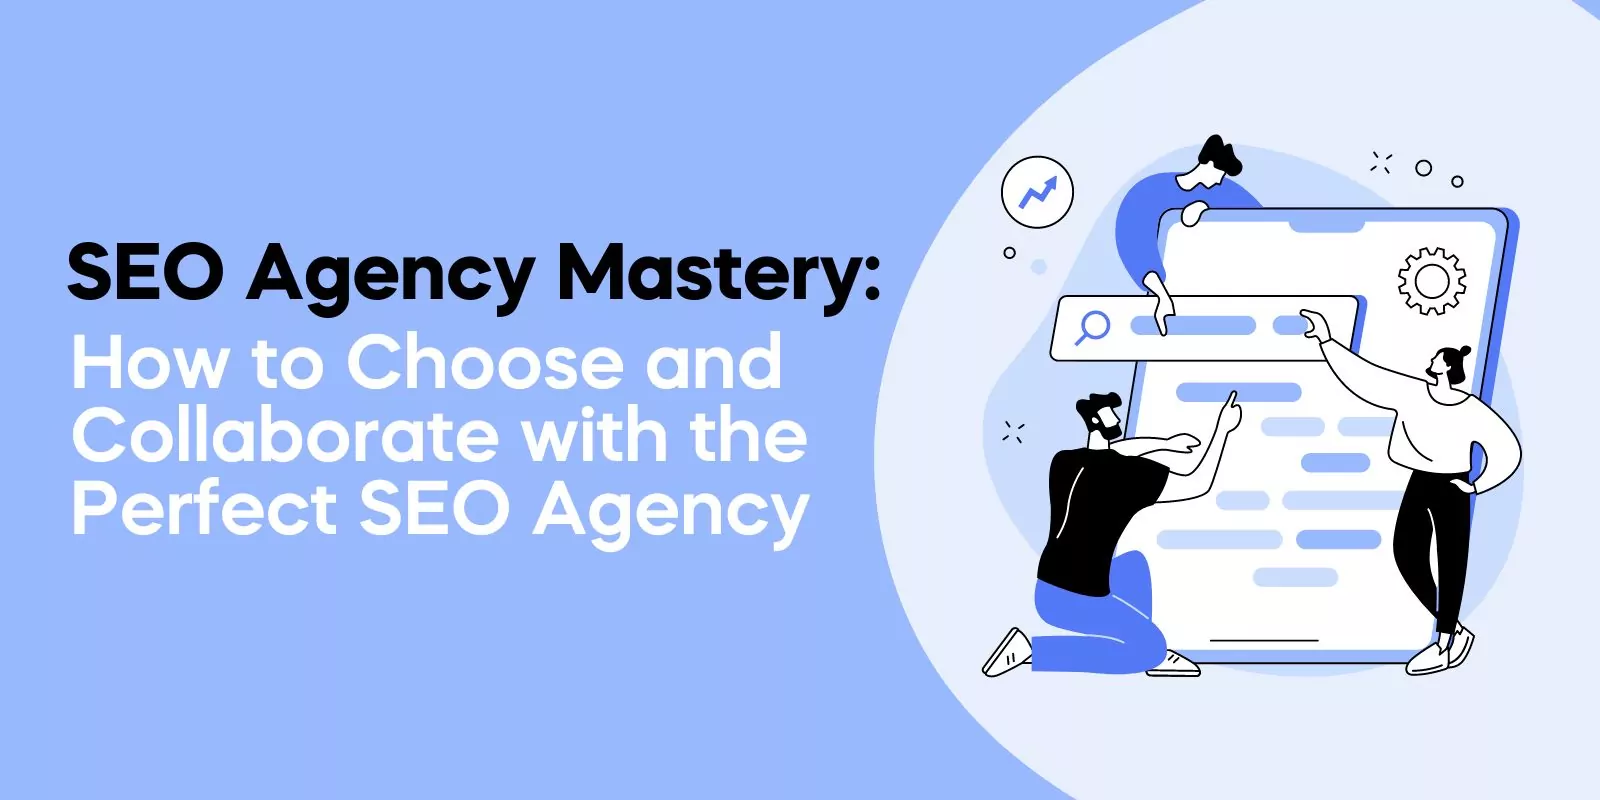 SEO Agency Mastery: How to Choose and Collaborate with the Perfect SEO Agency